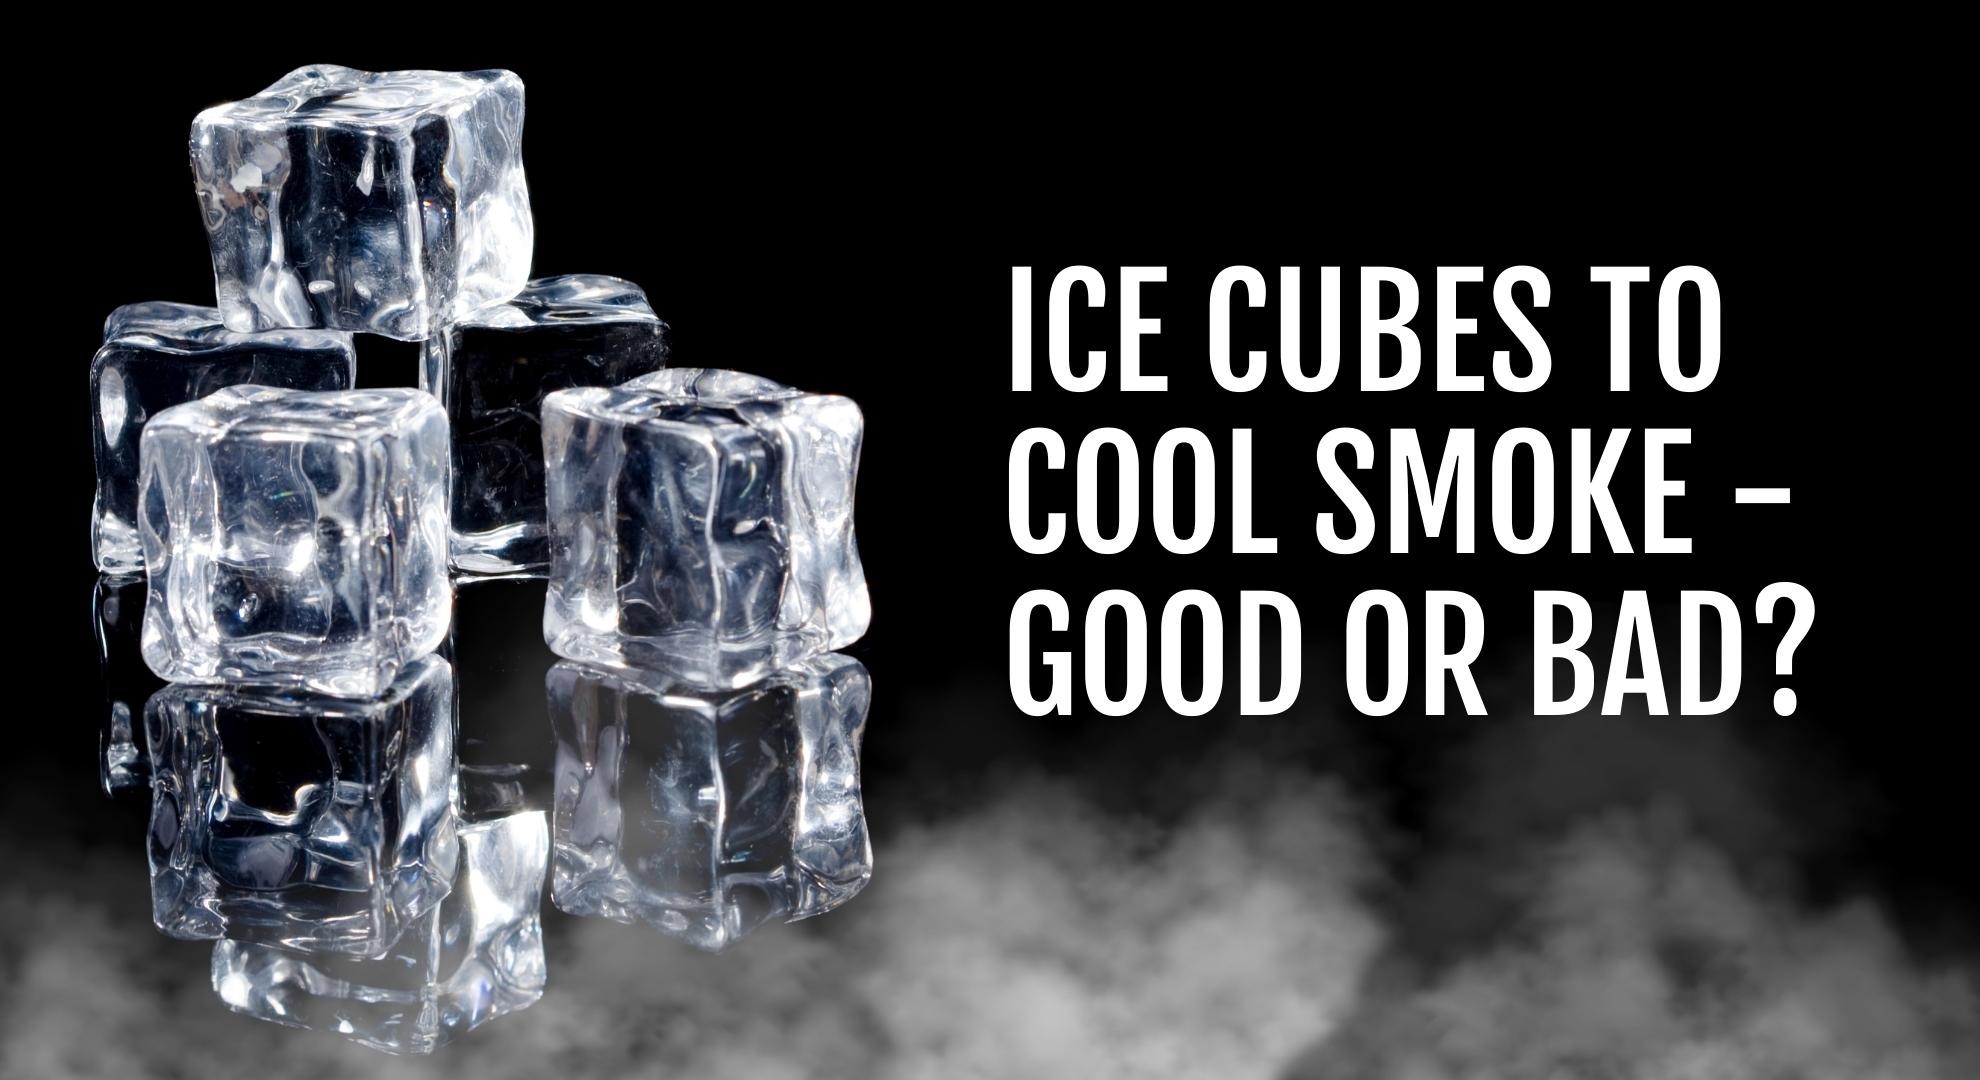 Ice Cubes To Cool Smoke - Good or Bad?